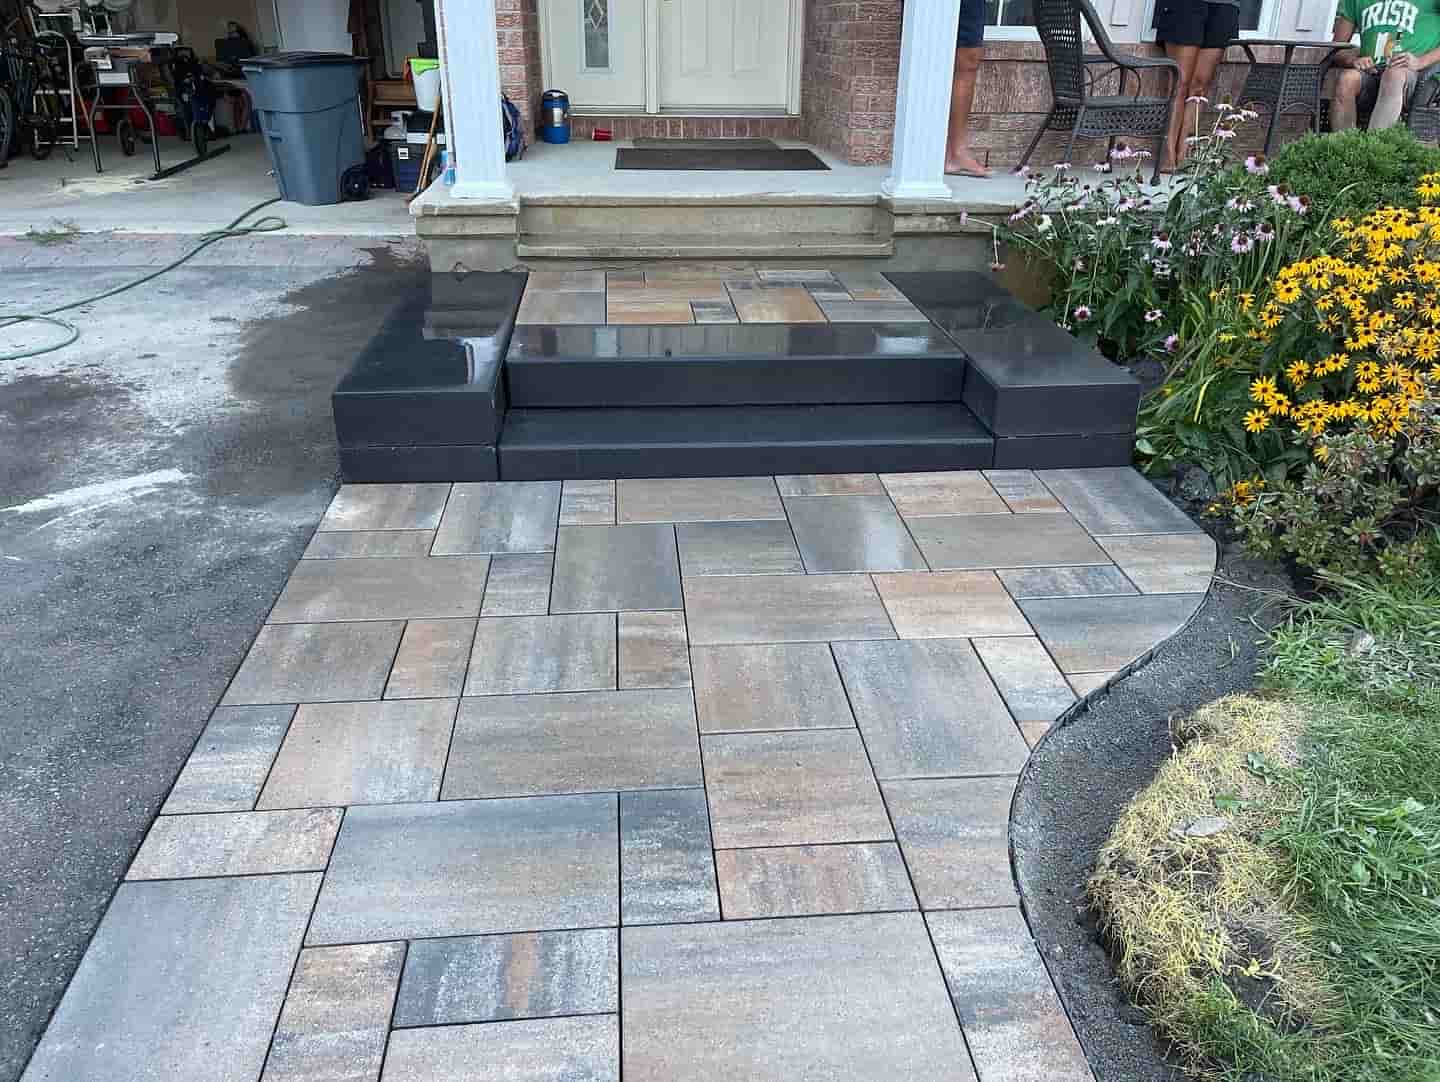 A front walkway featuring meticulously installed interlocking tiles leading to a house entrance.